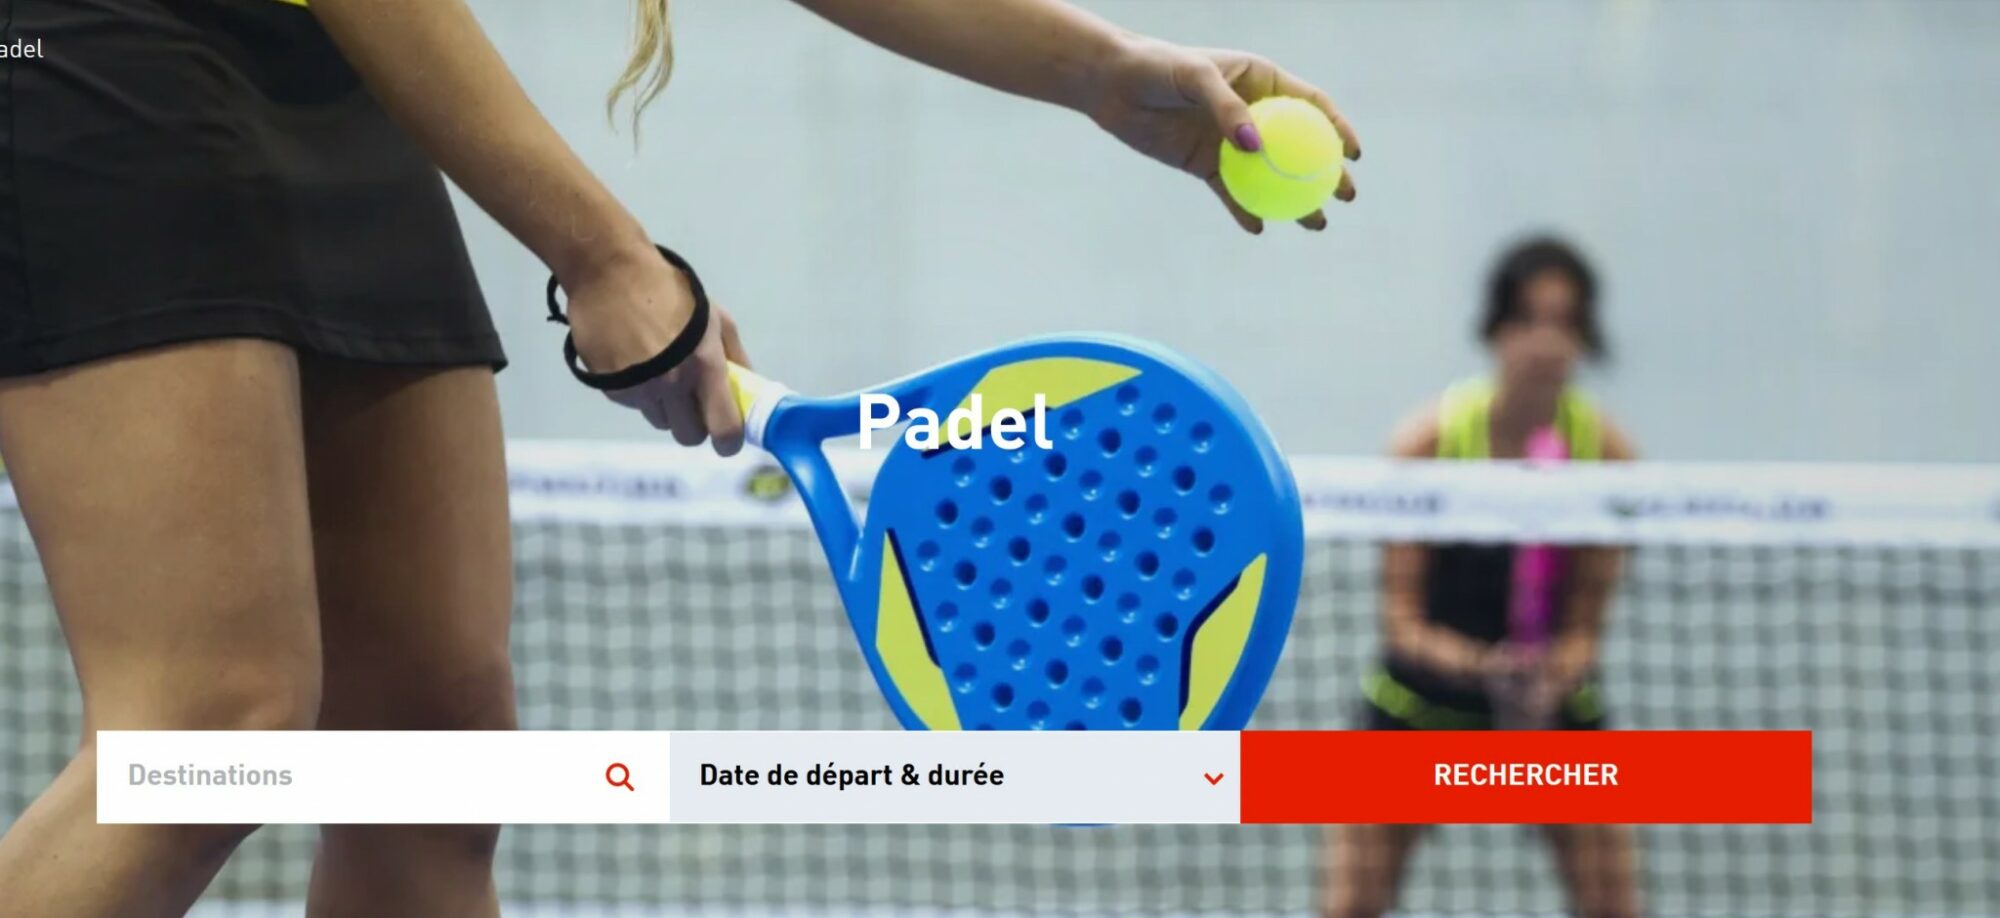 UCPA, the padel takes off